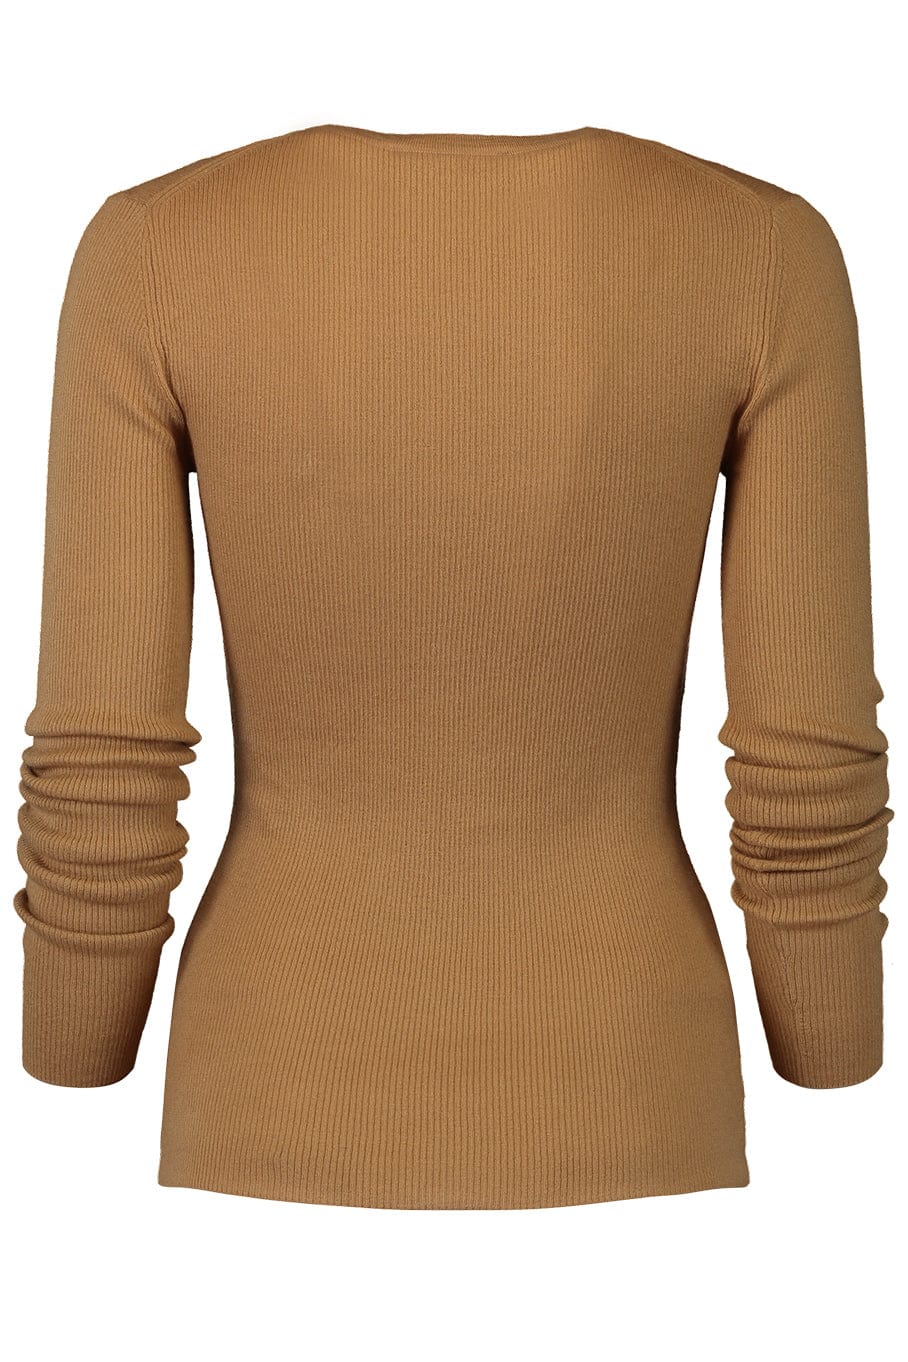 MICHAEL KORS COLLECTION-Hutton Ribbed Crewneck Pull Over - Camel-